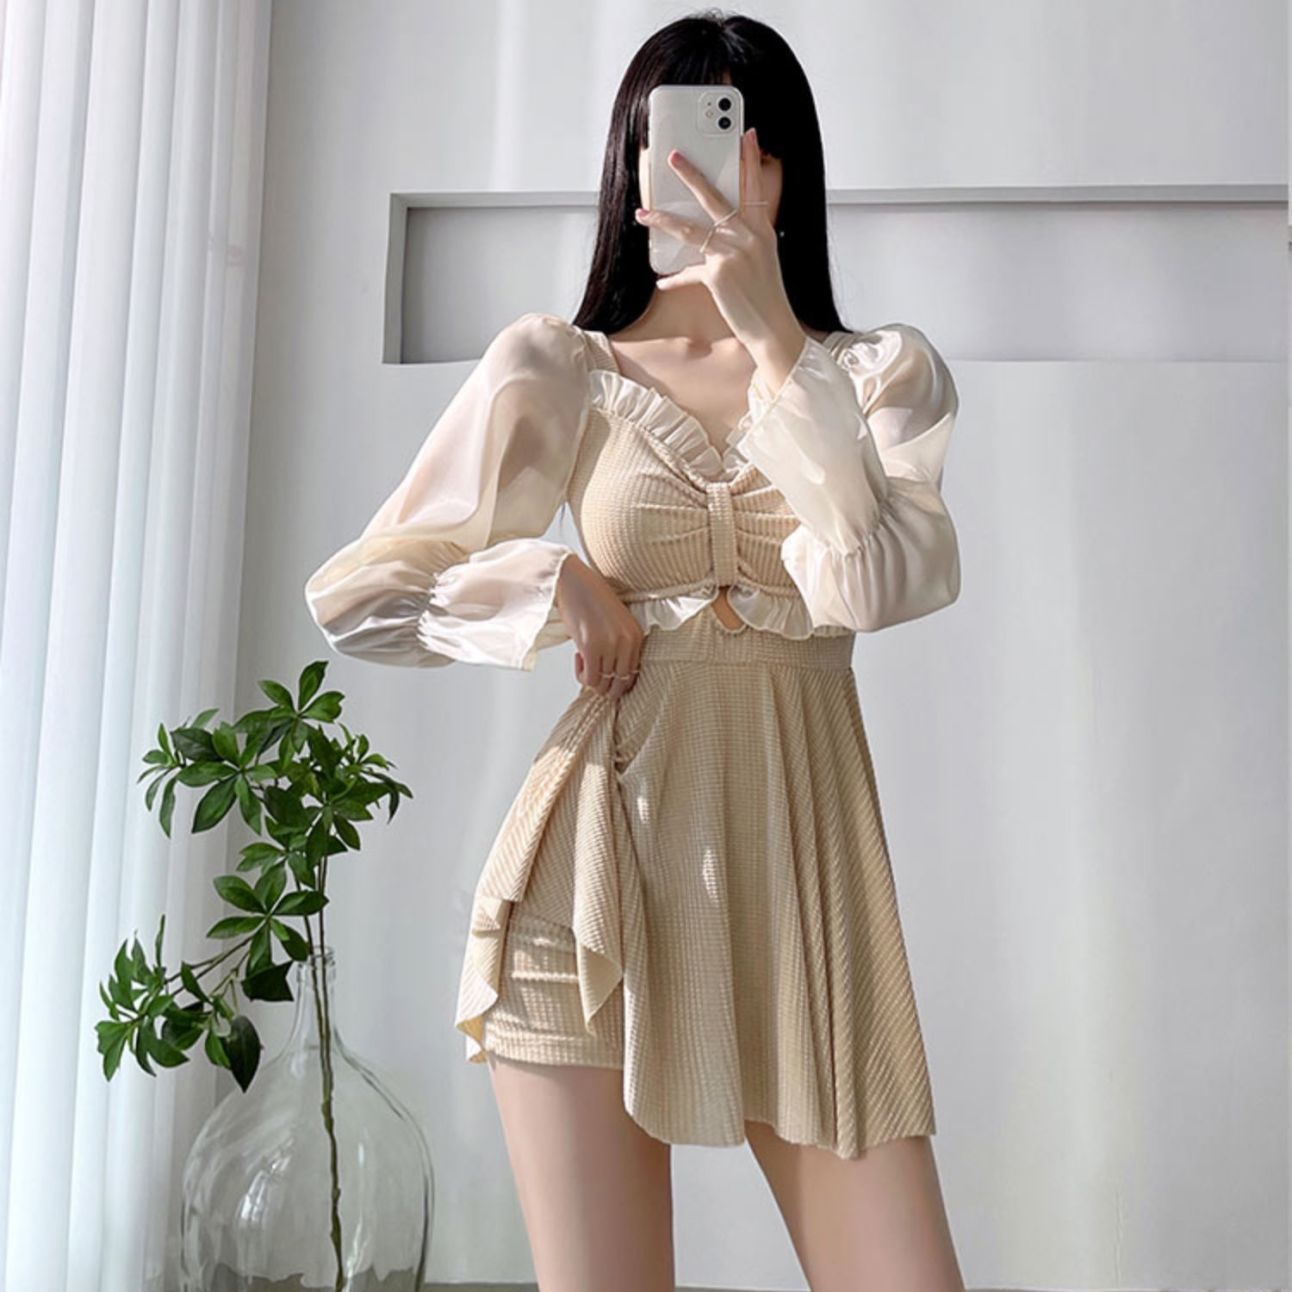 Swimsuit women's 2022 new ins super fairy Korean one-piece conservative skirt style cover belly thin student vacation swimsuit